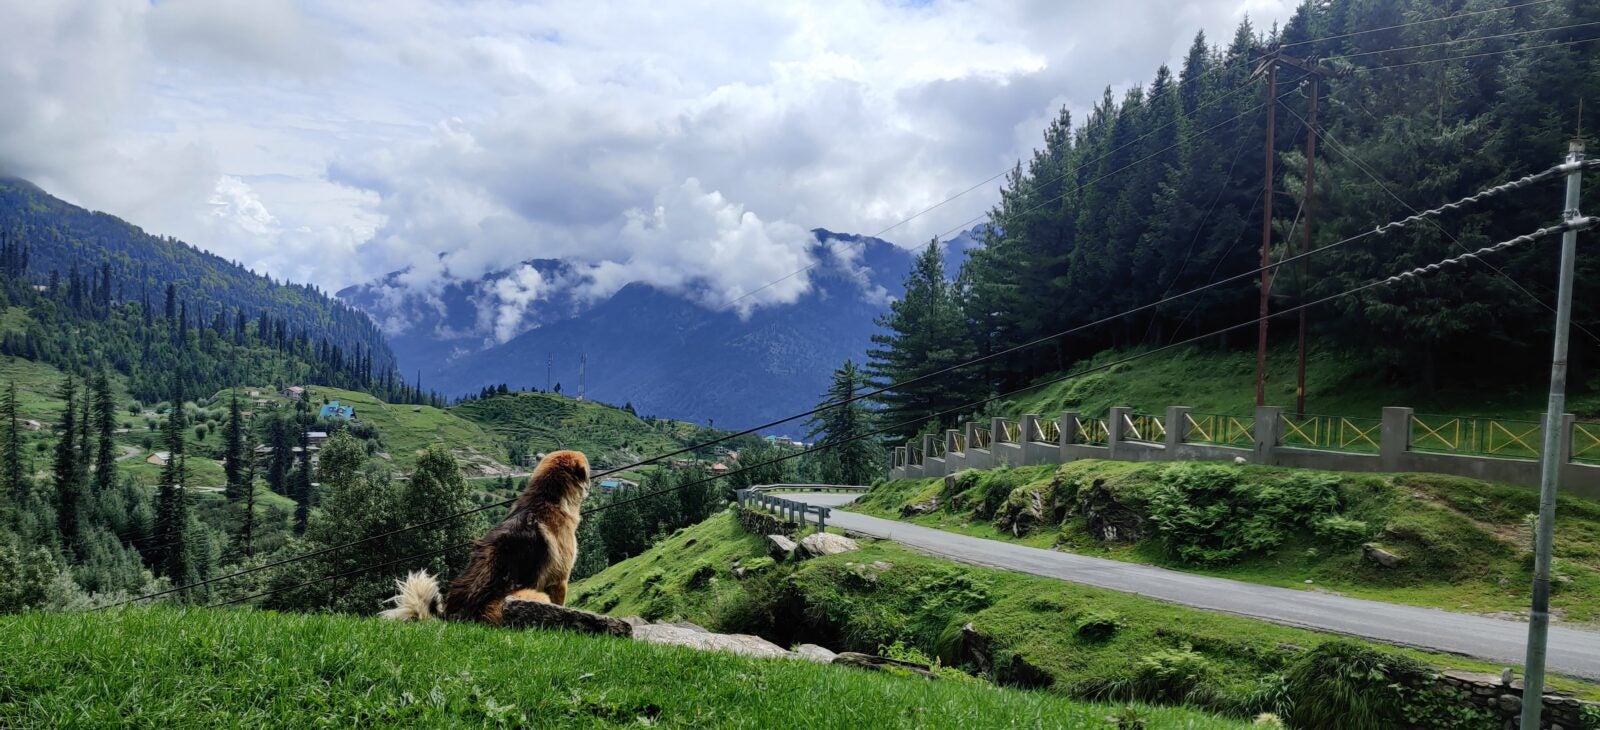 A panoramic view of mountains and a dog sitting on the grass.